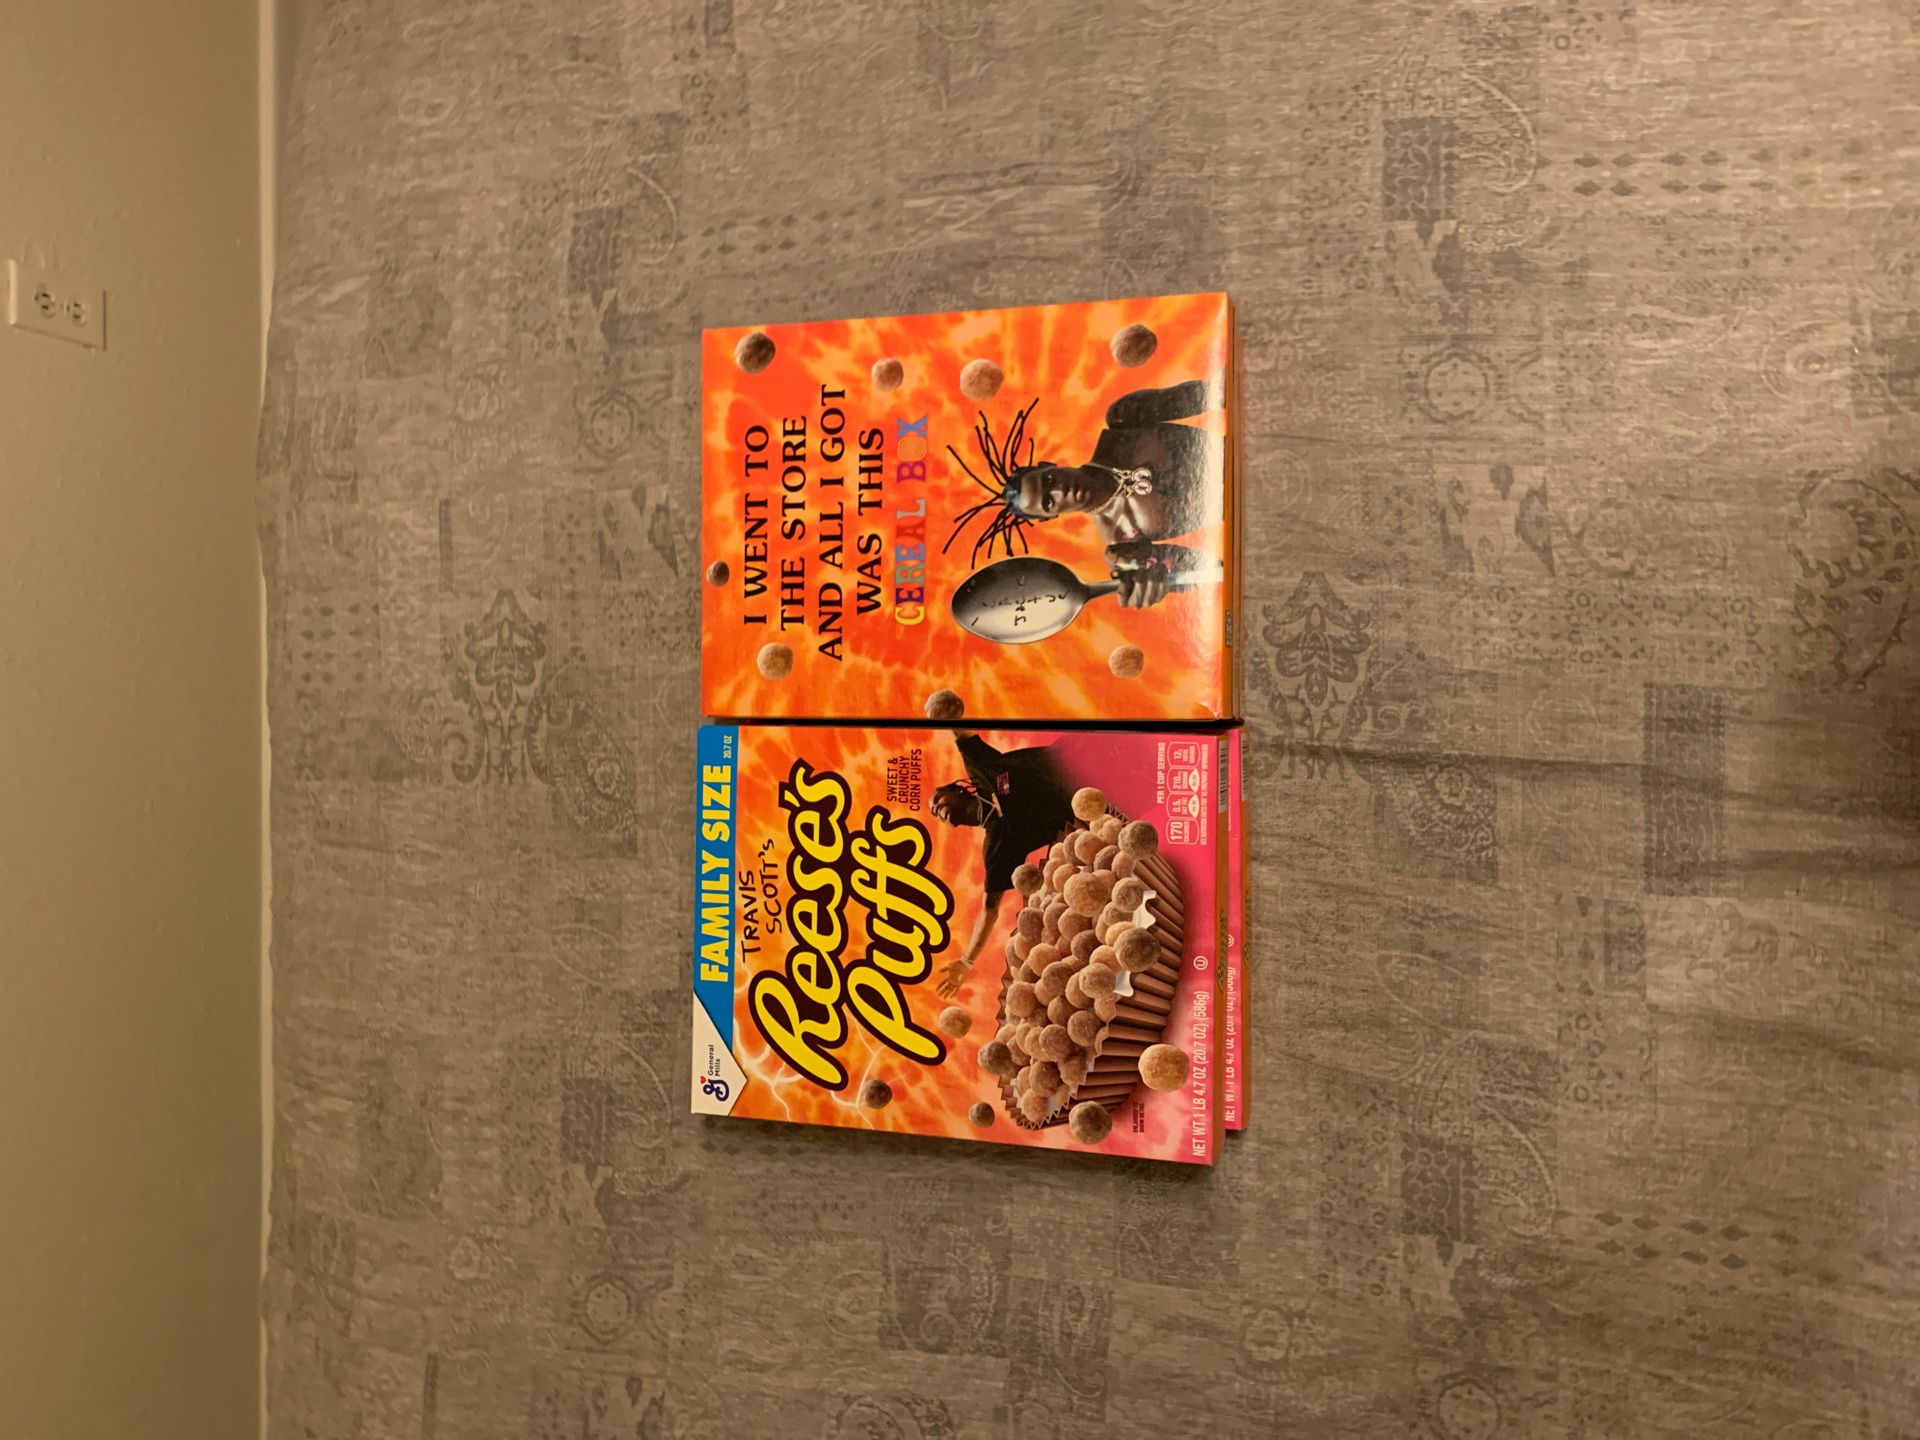 4 family size Travis Scott cereal